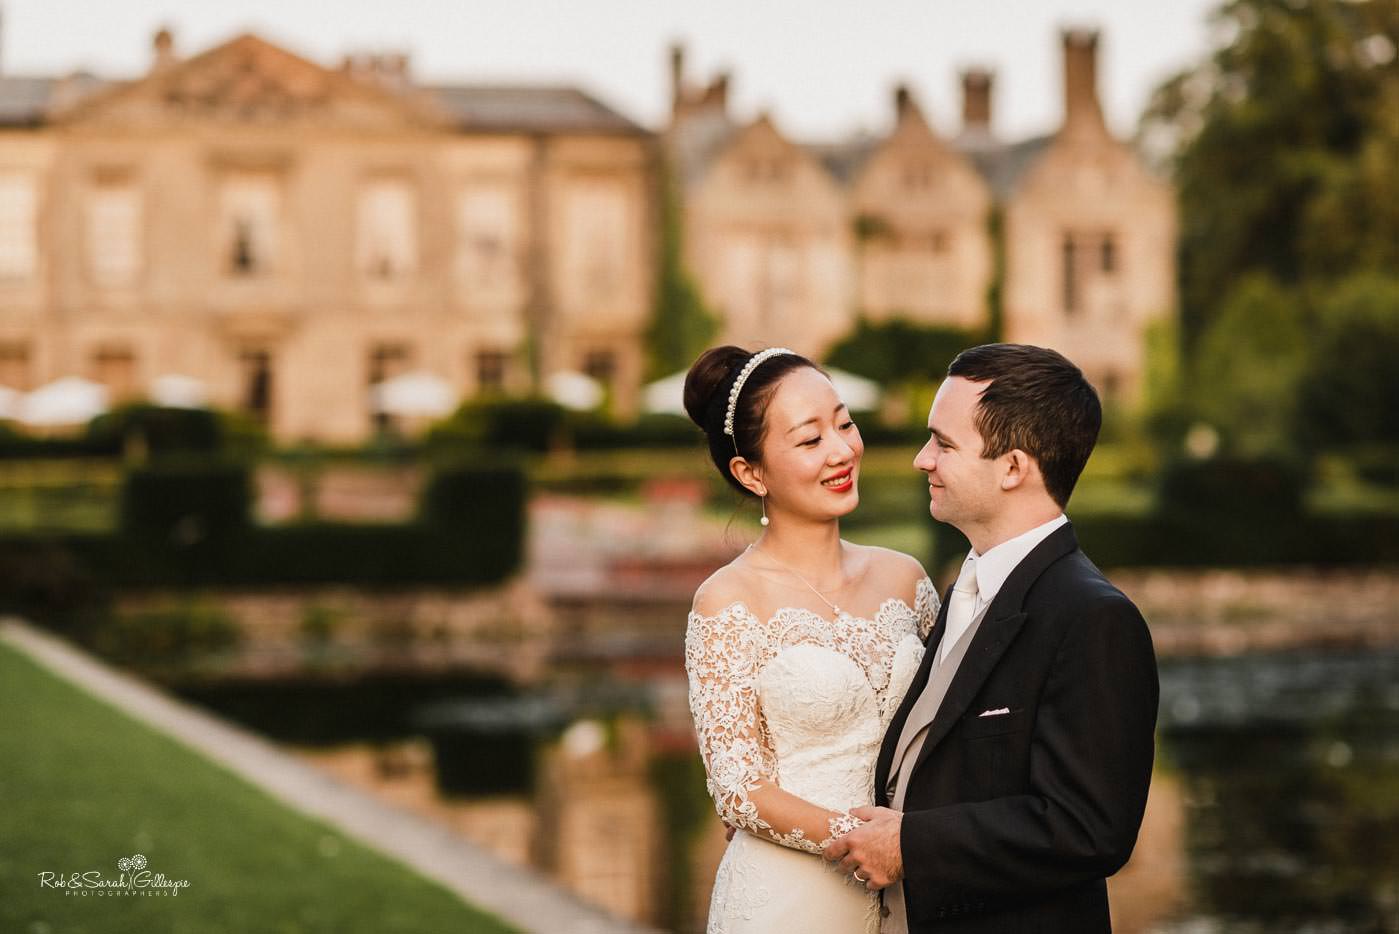 Natural and relaxed bride and groom photos at Coombe Abbey